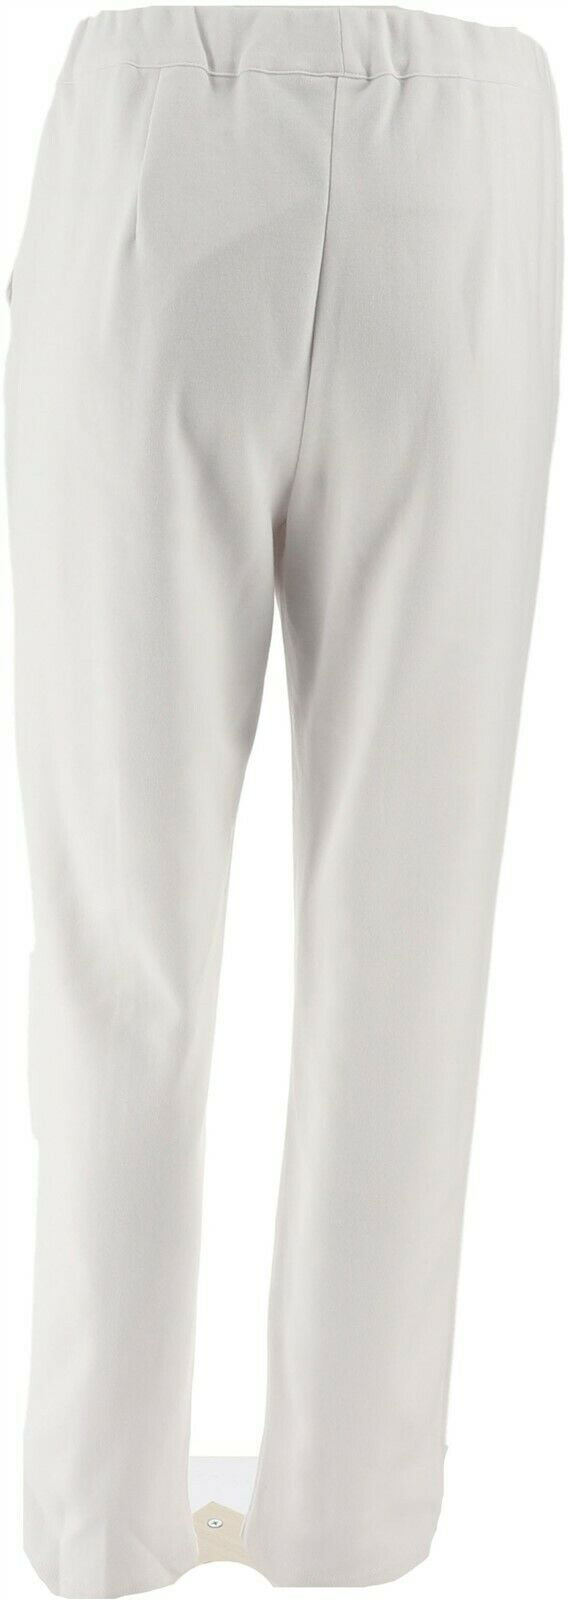 Bob Mackie Pull-On Ponte Knit Ankle Length Pants Front Seam White XL NEW A288445 